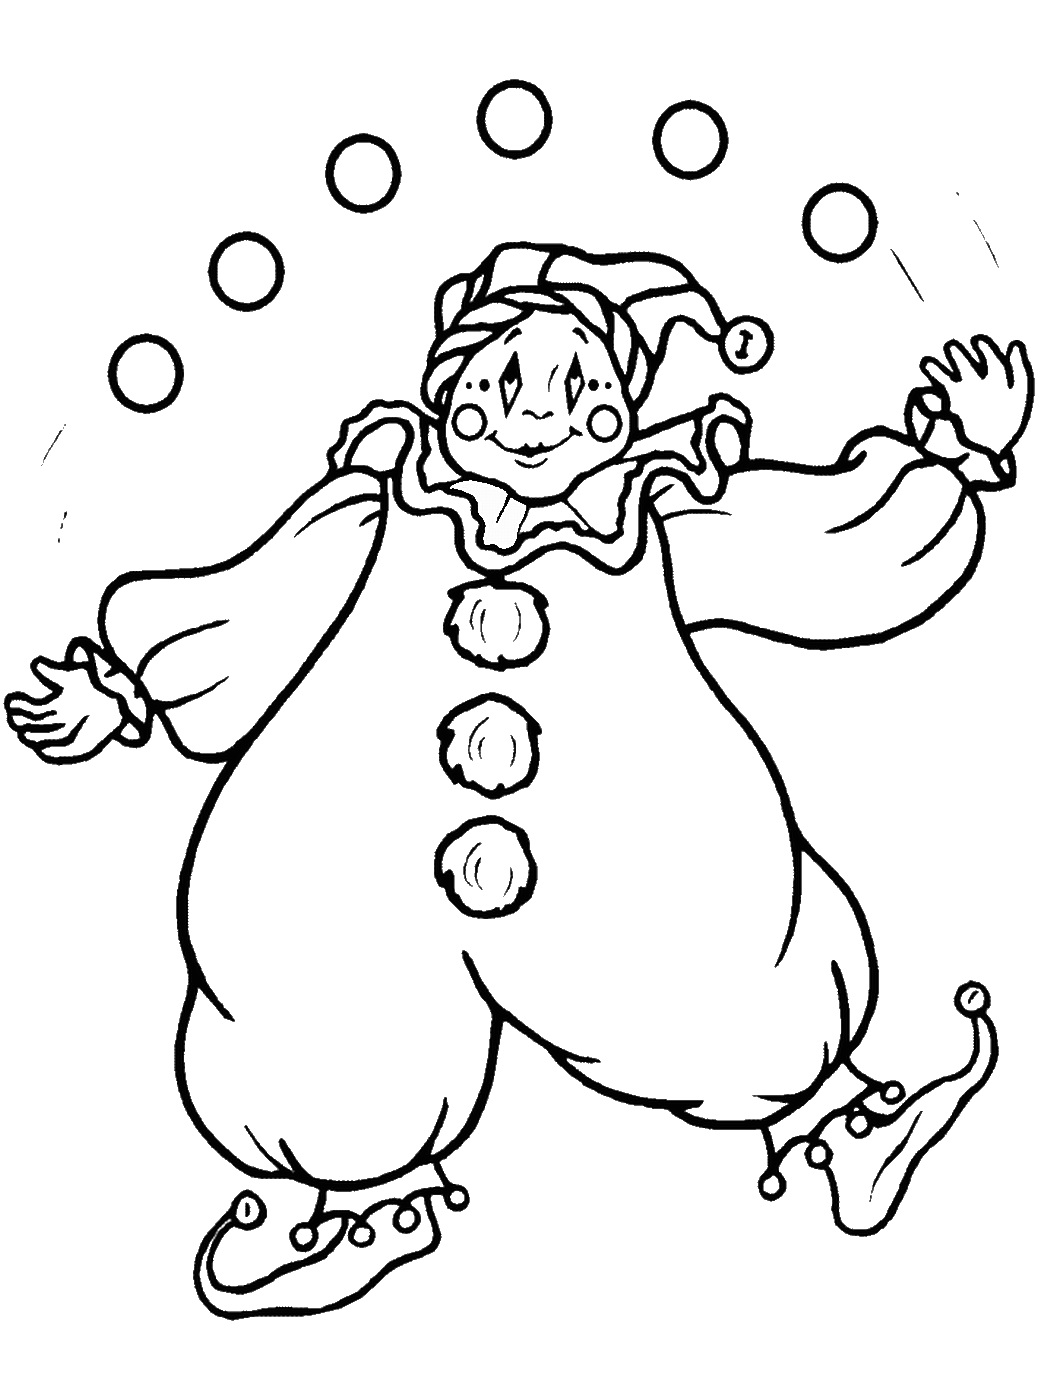 Clown Coloring Pages clownc18 Printable 2021 1767 Coloring4free